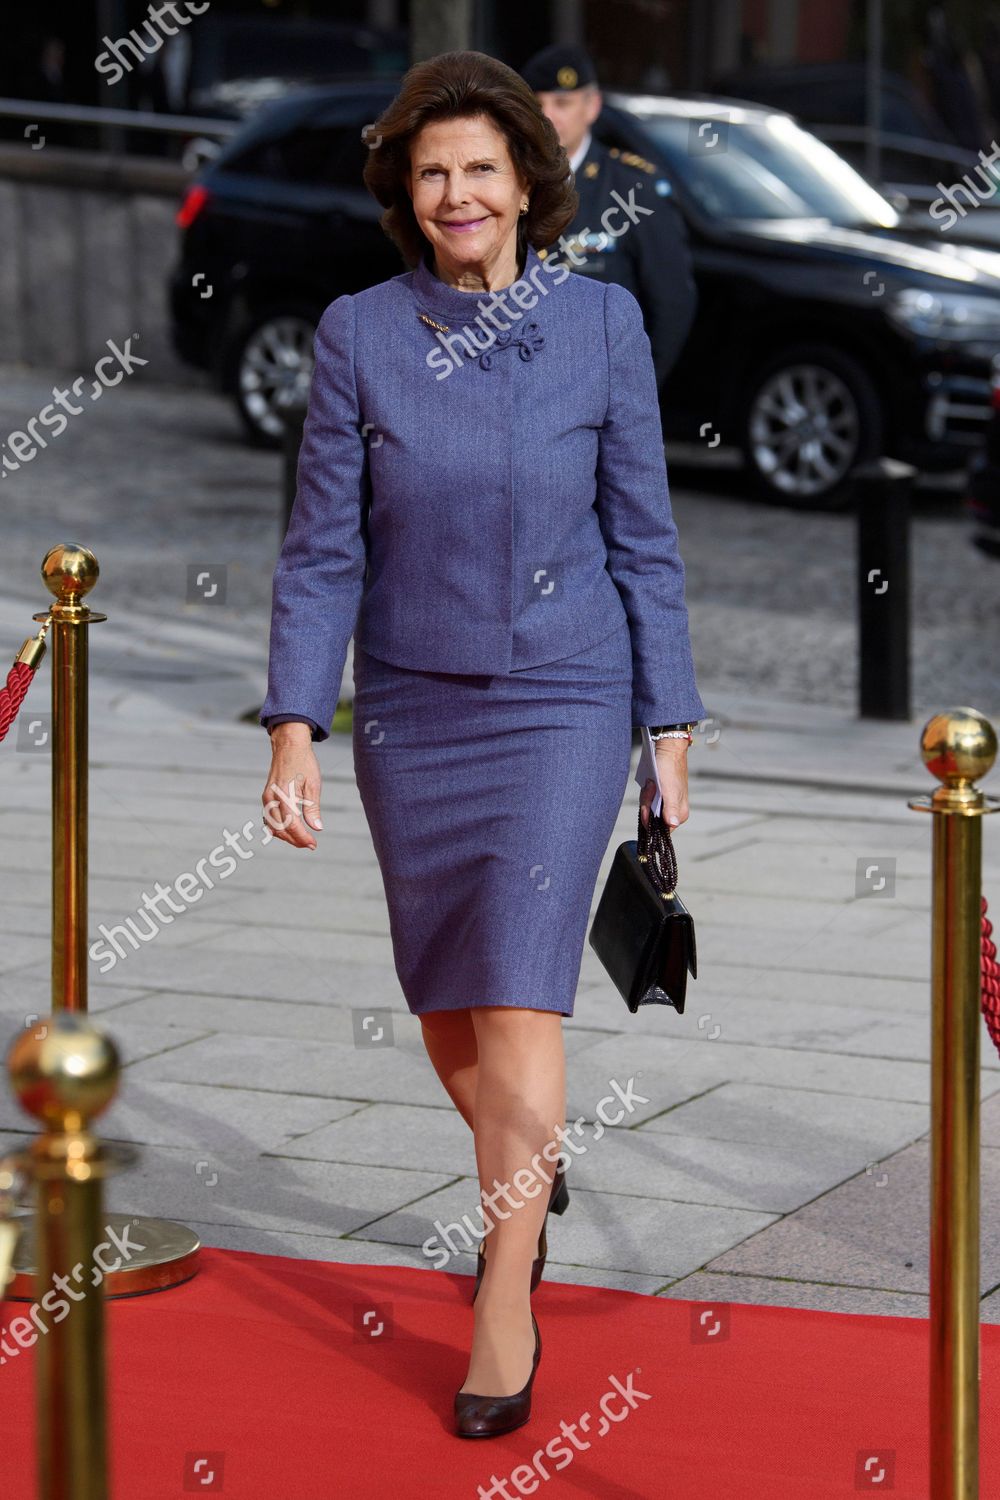 king-carl-gustaf-and-queen-silvia-visit-stockholm-county-sweden-shutterstock-editorial-10952012b.jpg